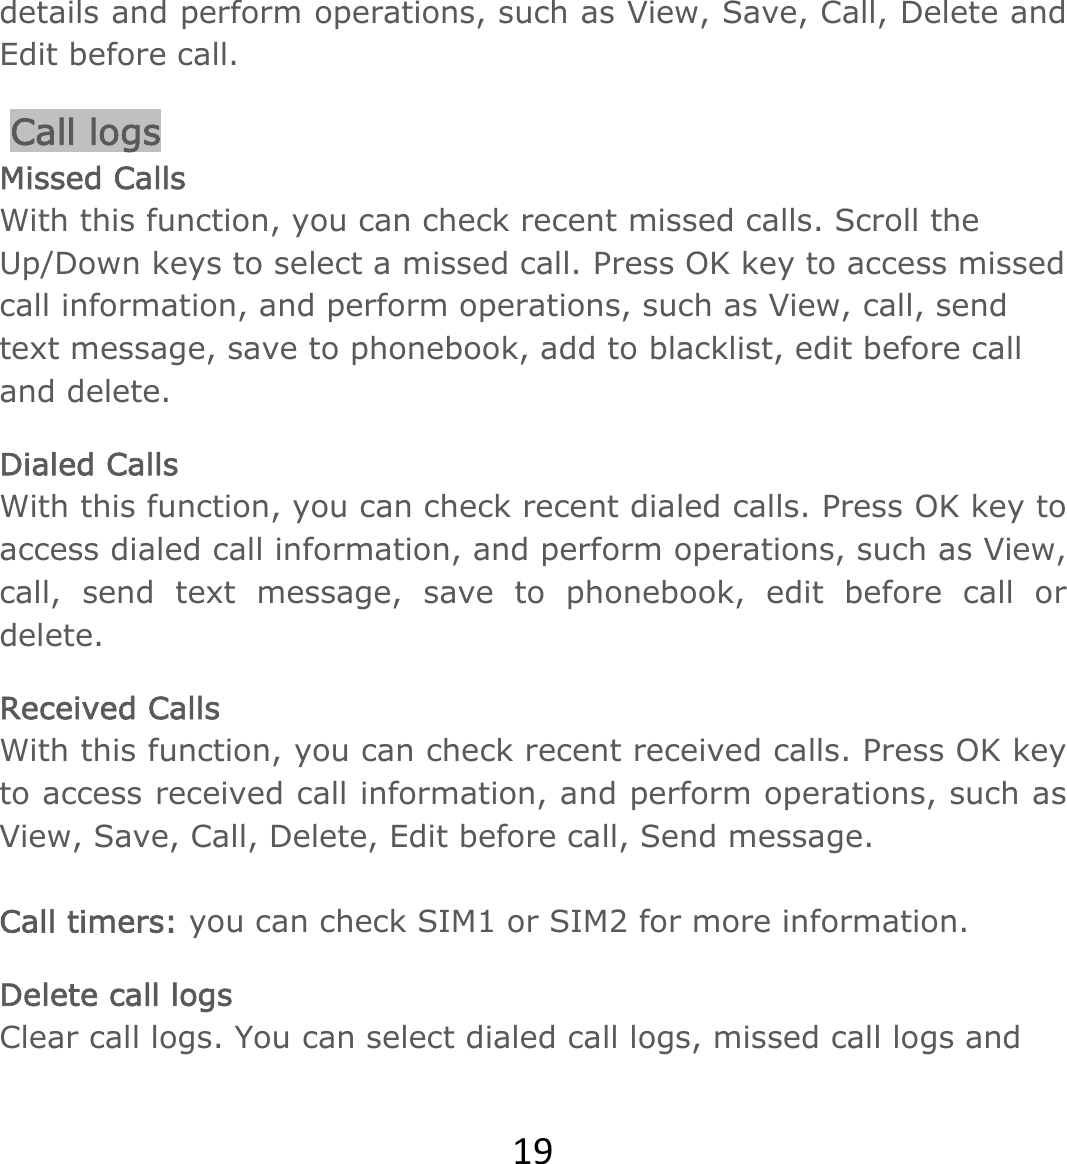 19details and perform operations, such as View, Save, Call, Delete and Edit before call.  Call logs Missed Calls With this function, you can check recent missed calls. Scroll the Up/Down keys to select a missed call. Press OK key to access missed call information, and perform operations, such as View, call, send text message, save to phonebook, add to blacklist, edit before call and delete.  Dialed Calls With this function, you can check recent dialed calls. Press OK key to access dialed call information, and perform operations, such as View, call, send text message, save to phonebook, edit before call or delete.  Received Calls With this function, you can check recent received calls. Press OK key to access received call information, and perform operations, such as View, Save, Call, Delete, Edit before call, Send message.   Call timers: you can check SIM1 or SIM2 for more information. Delete call logs Clear call logs. You can select dialed call logs, missed call logs and 